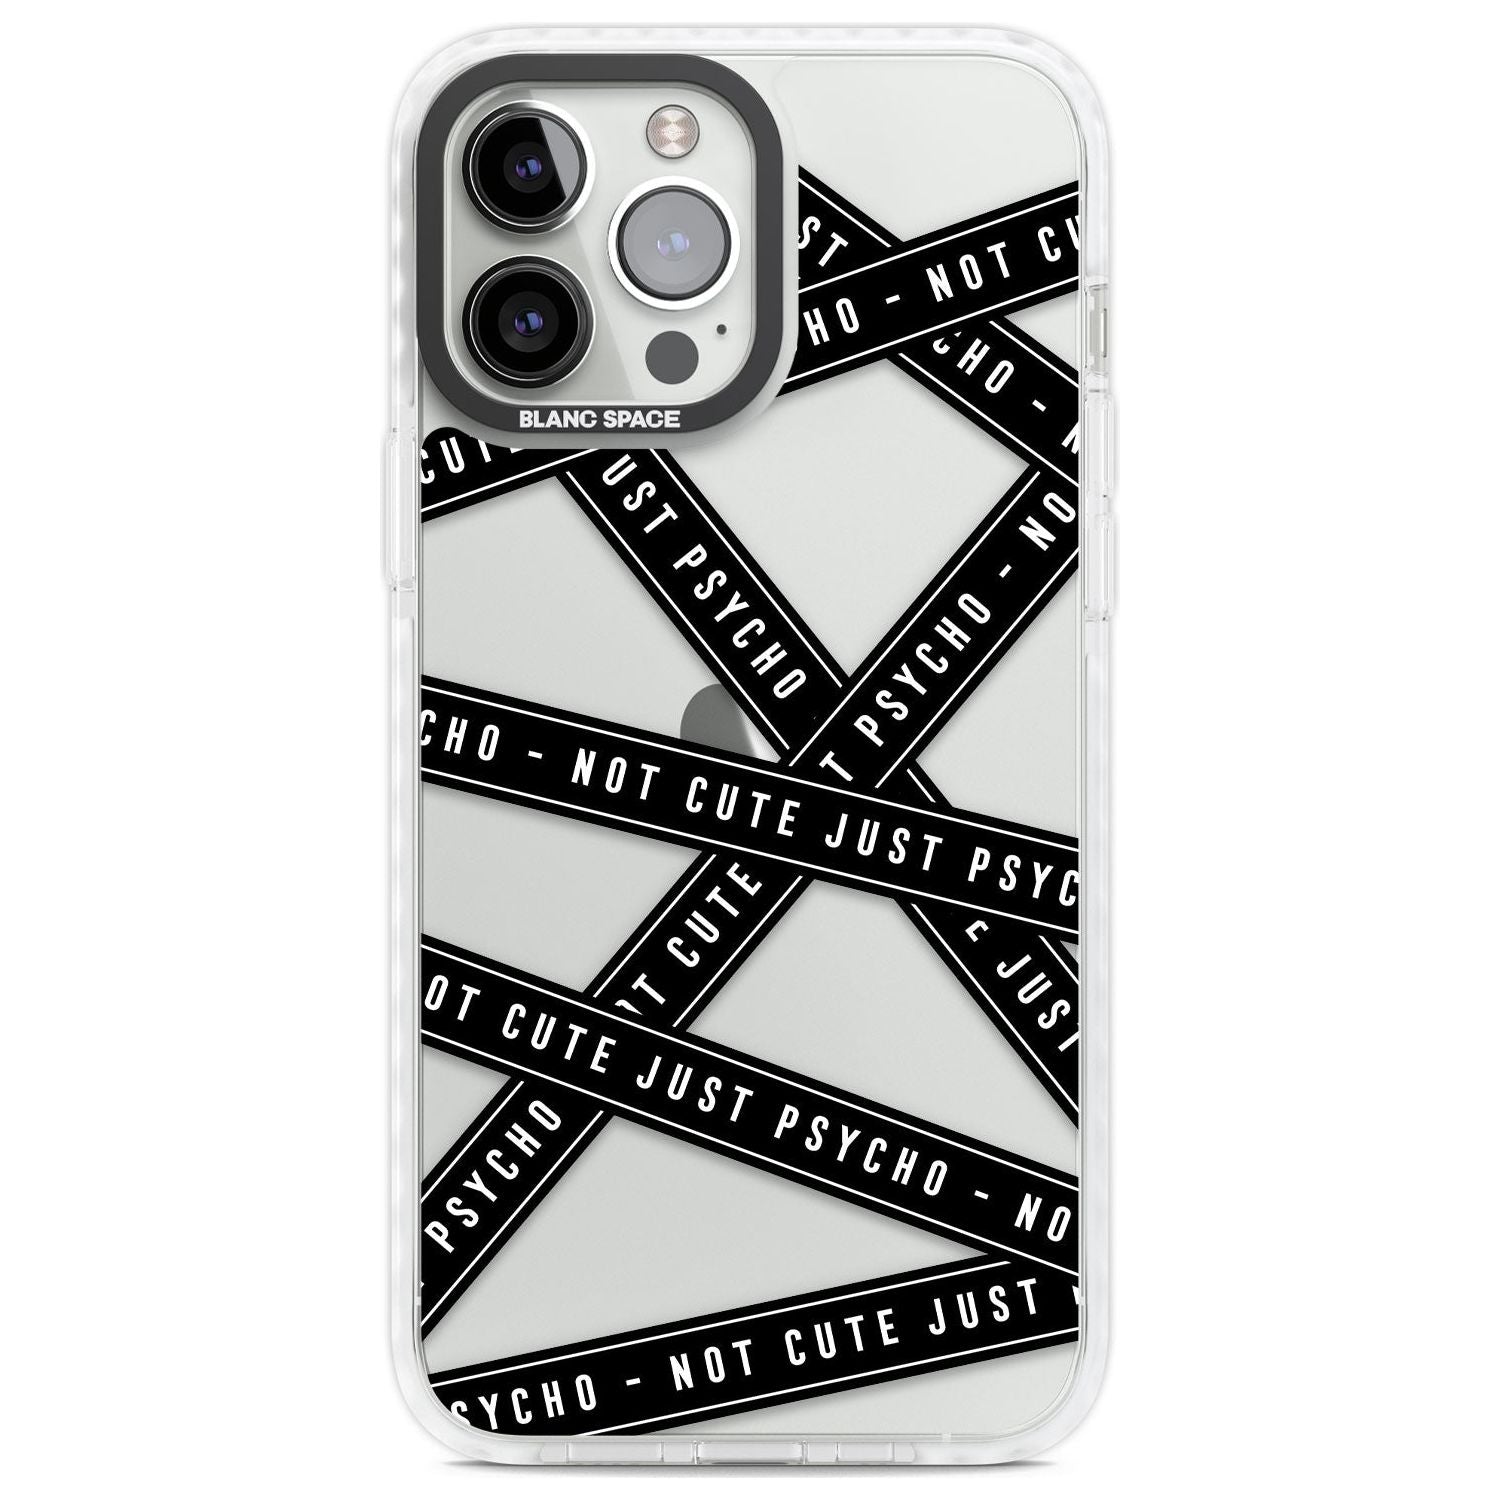 Caution Tape (Clear) Not Cute Just Psycho Phone Case iPhone 13 Pro Max / Impact Case,iPhone 14 Pro Max / Impact Case Blanc Space